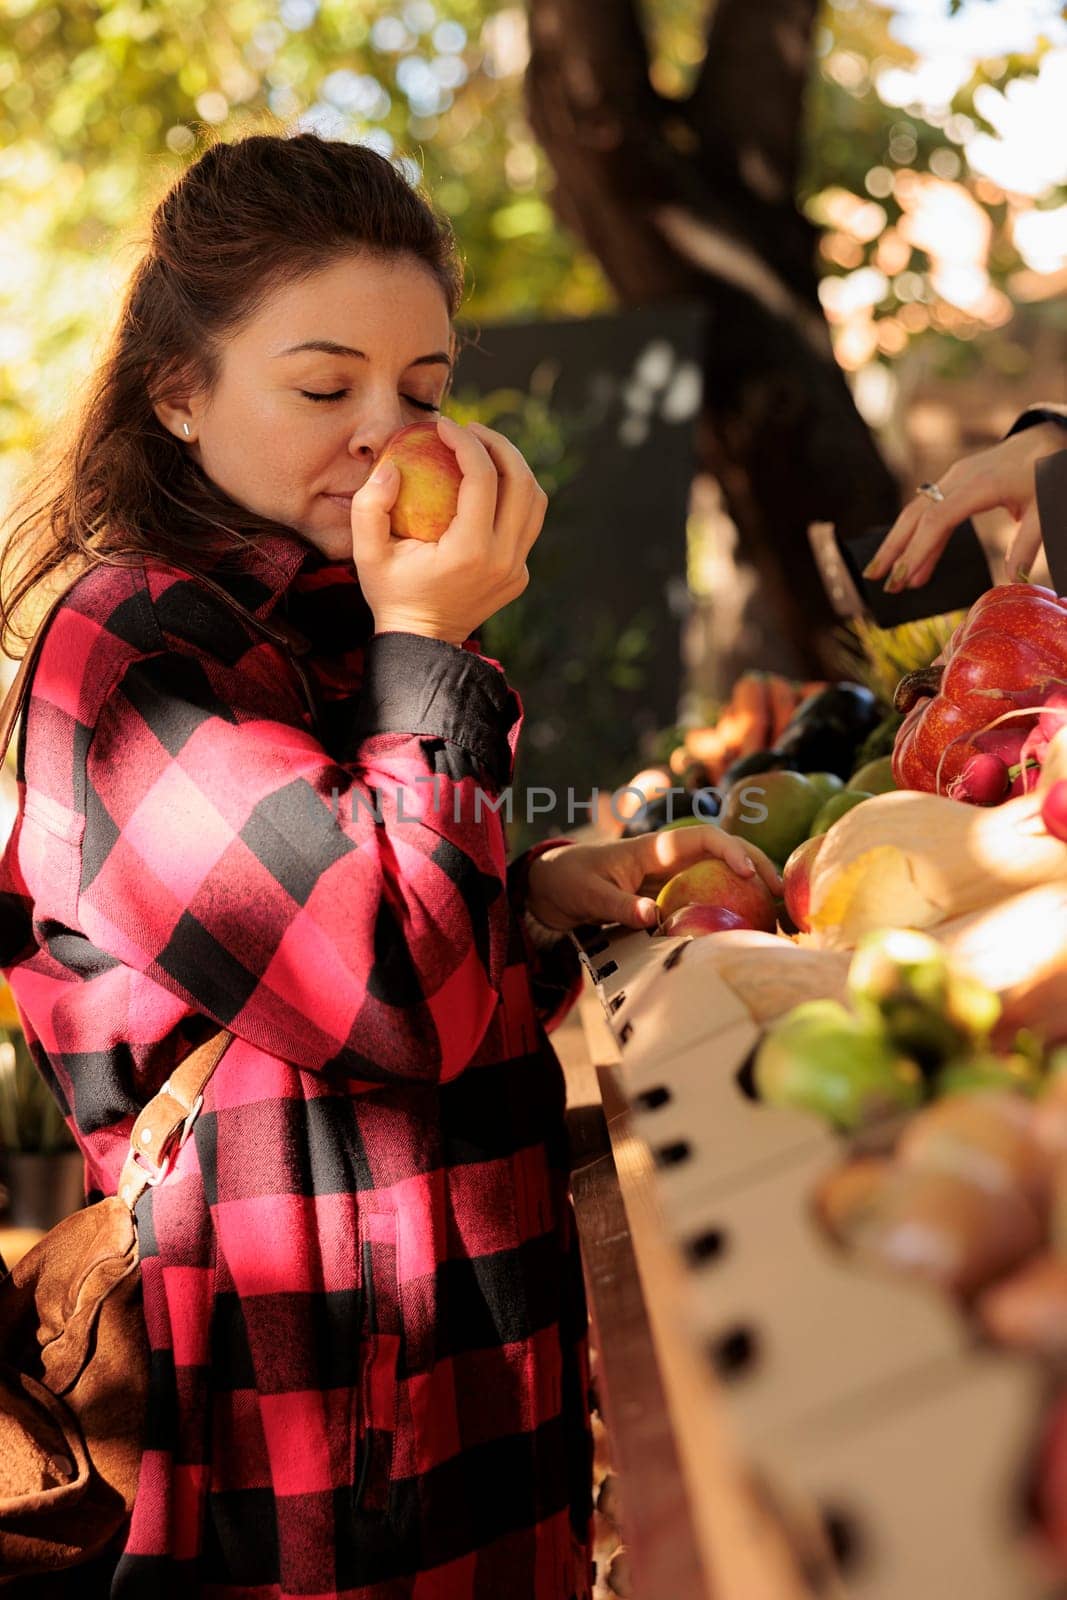 Female buyer enjoying natural fresh smell of apples, standing in front of farmers market stand. Woman smelling organic colorful fruits before buying homegrown eco produce from counter.